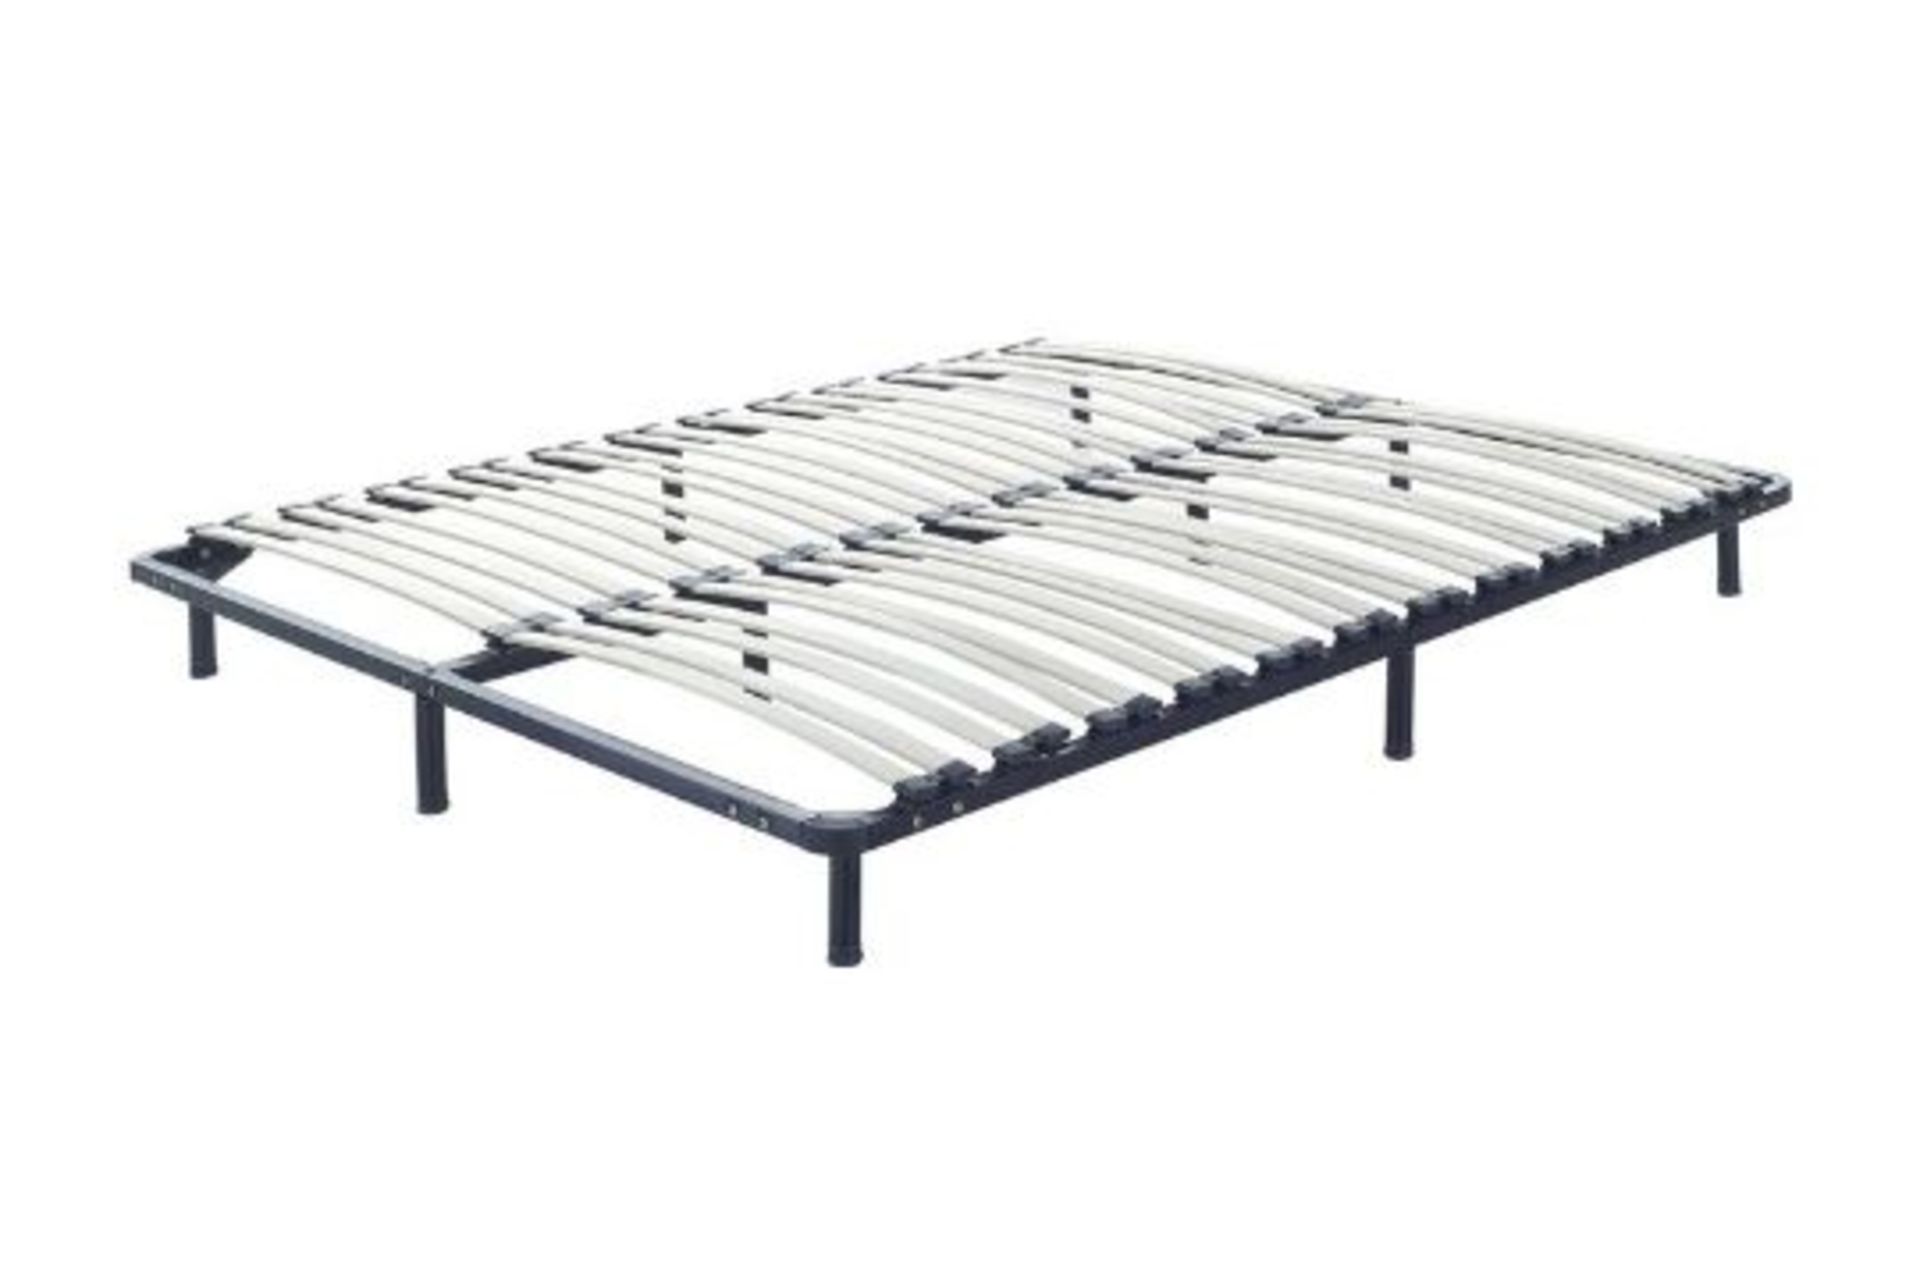 Combourg King Freestanding Slatted Bed Base. - R50. RRP £219.99. Ensure your sleep is comfortable